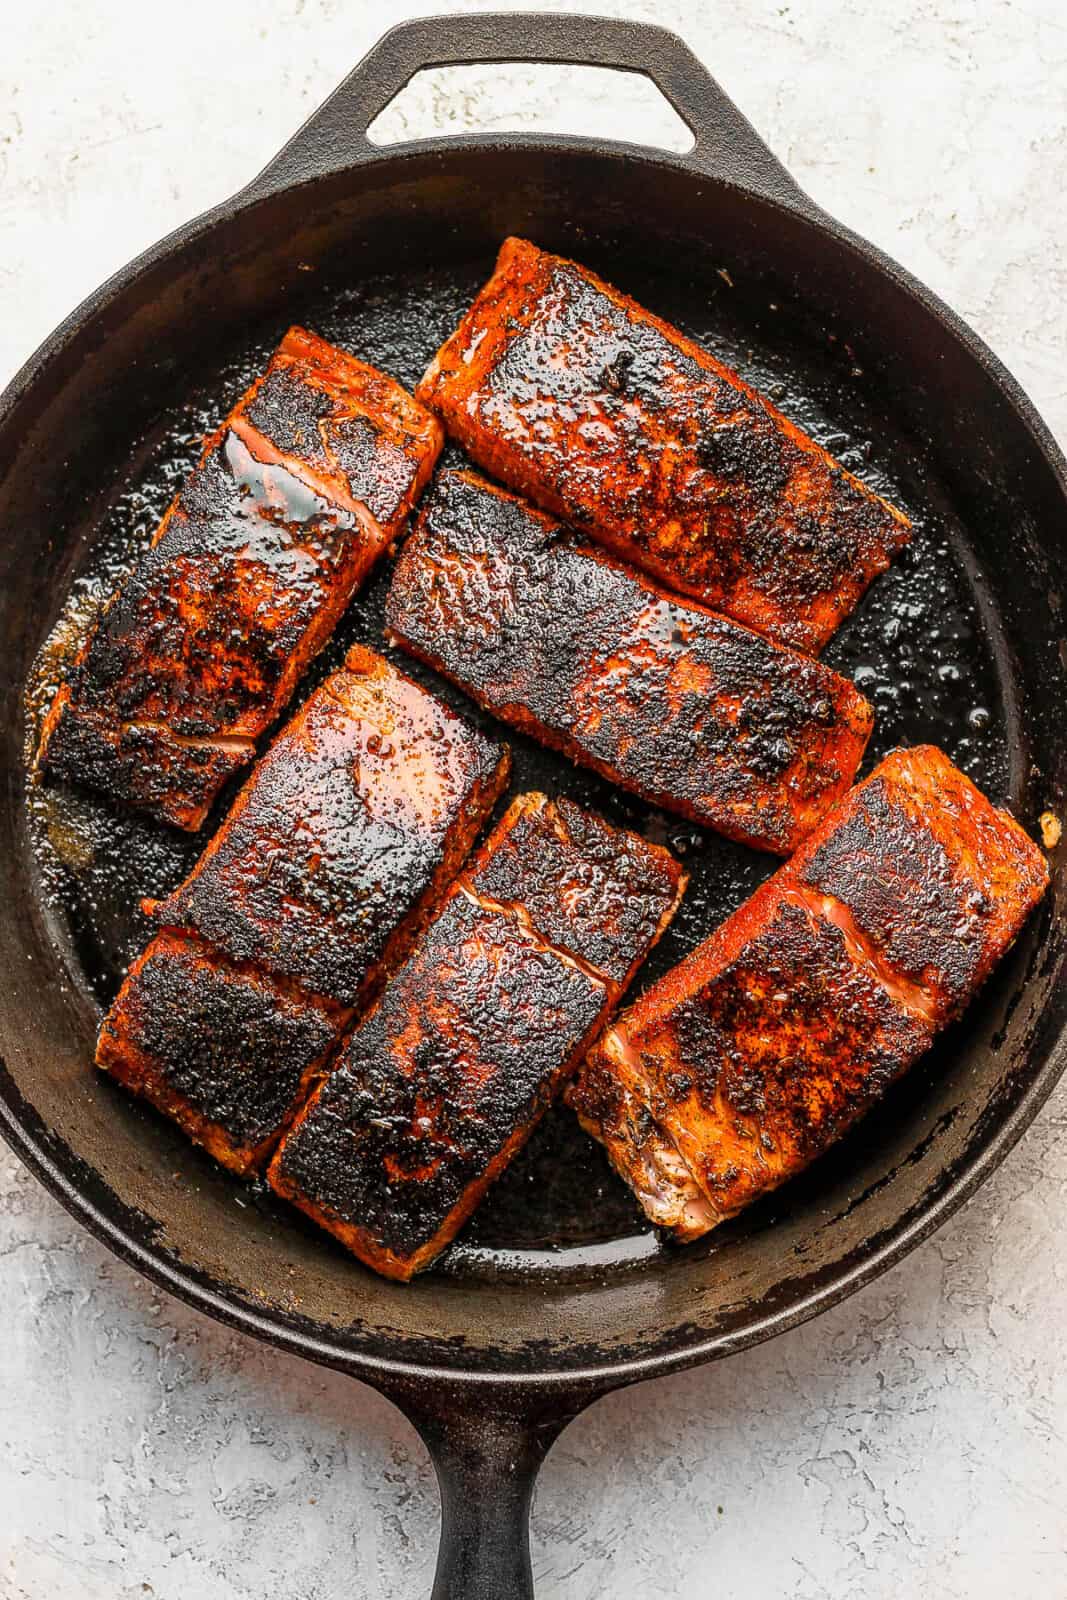 Blackened salmon in a cast iron skillet.